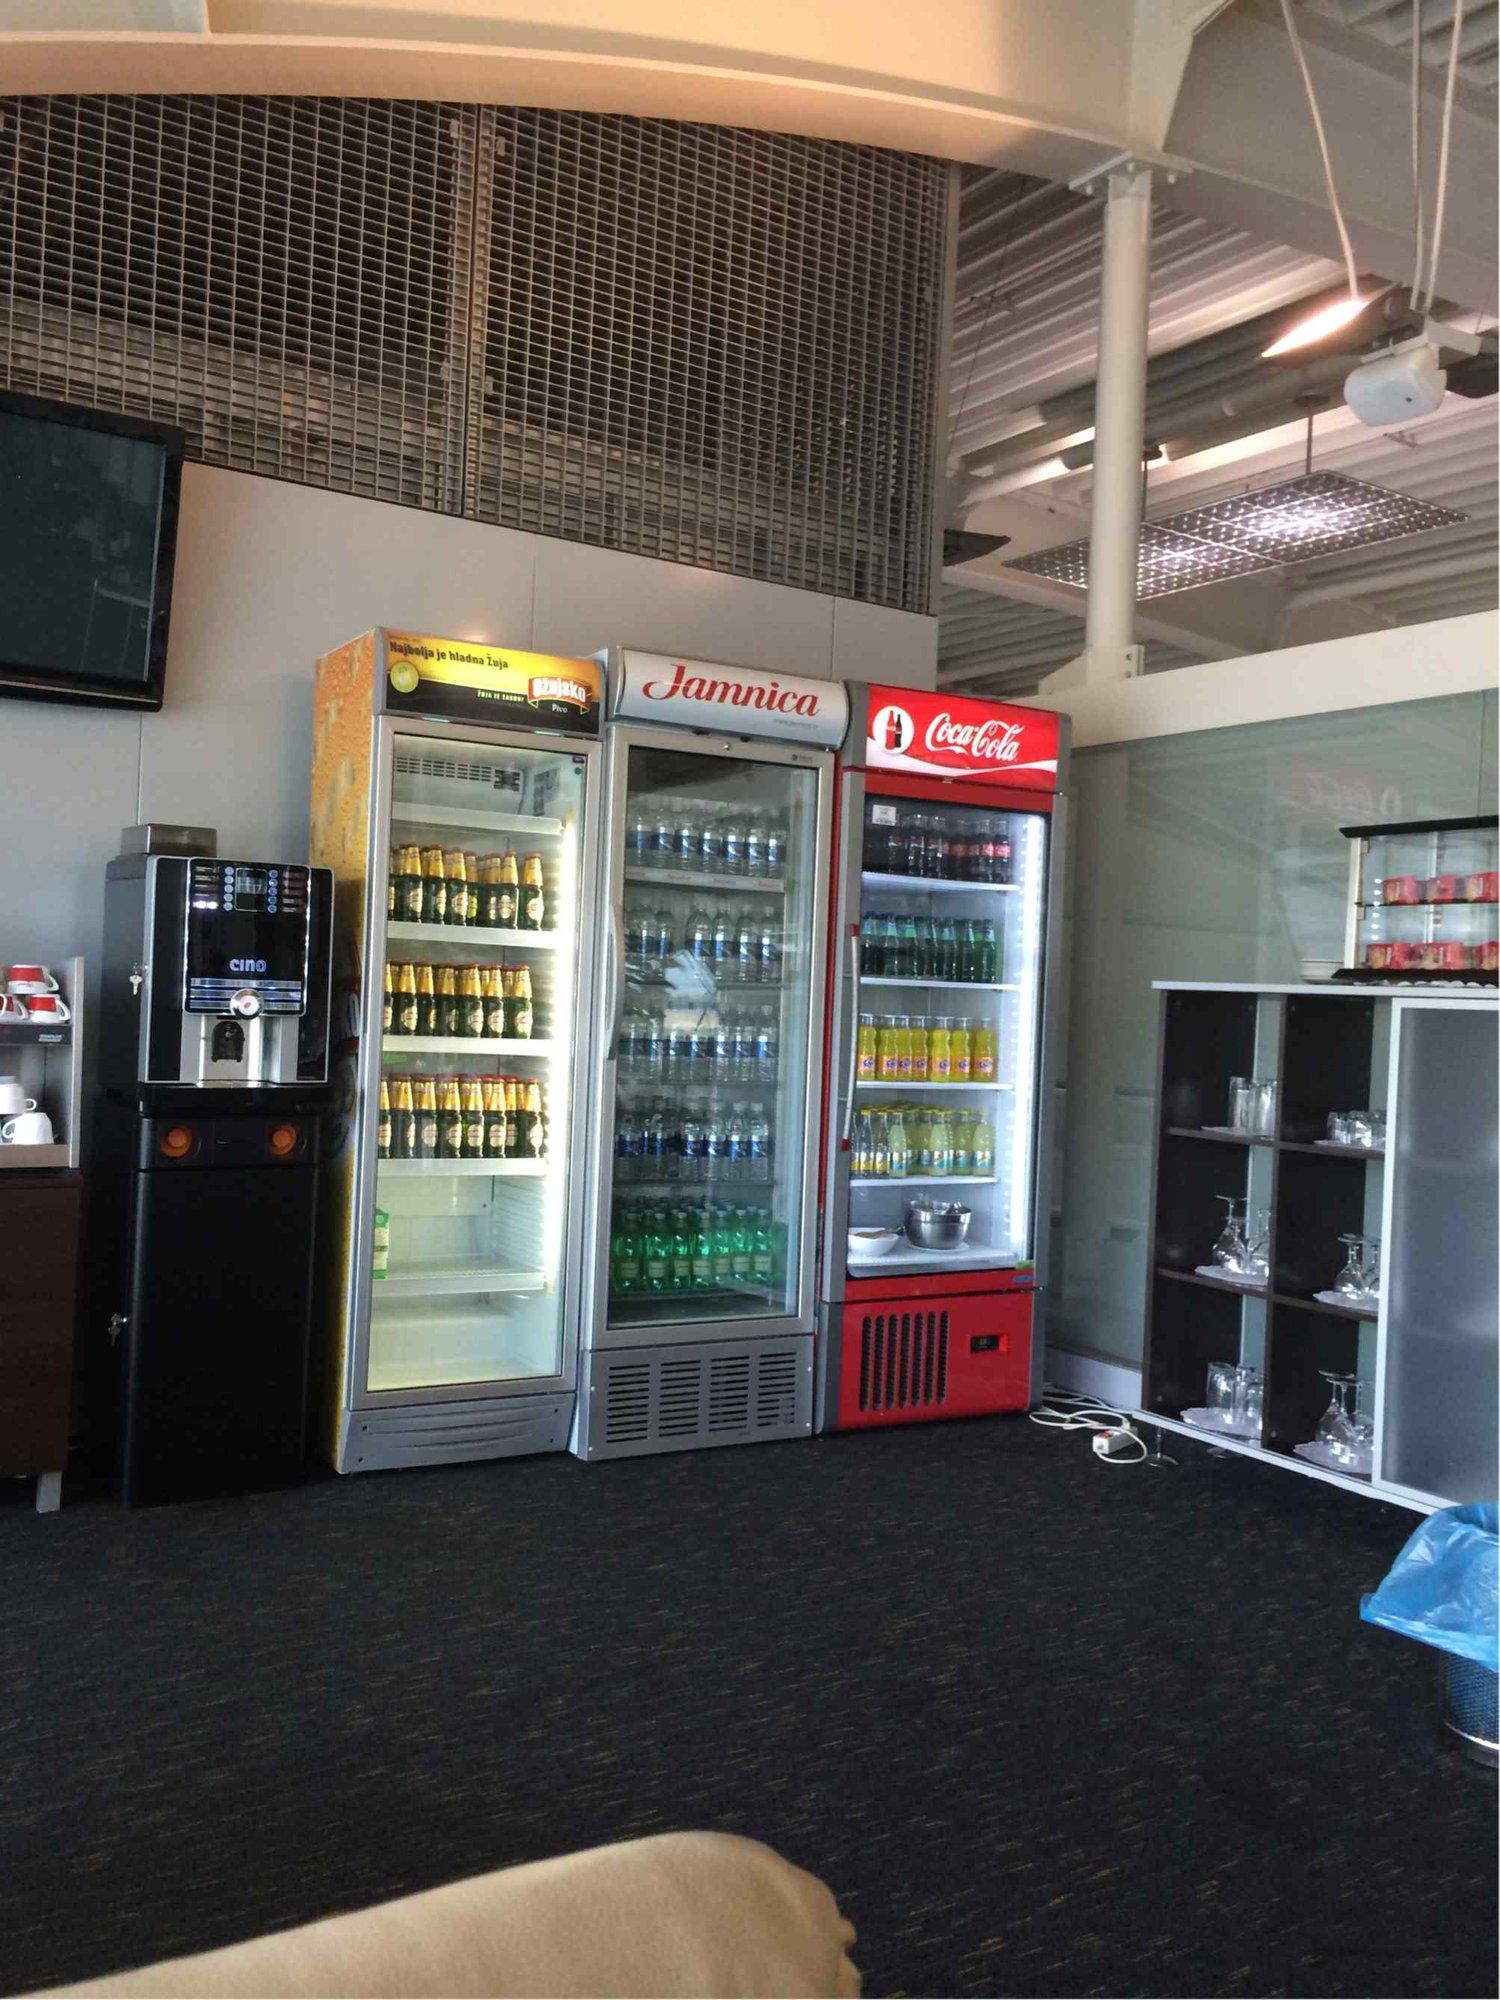 Airport Business Lounge image 6 of 20